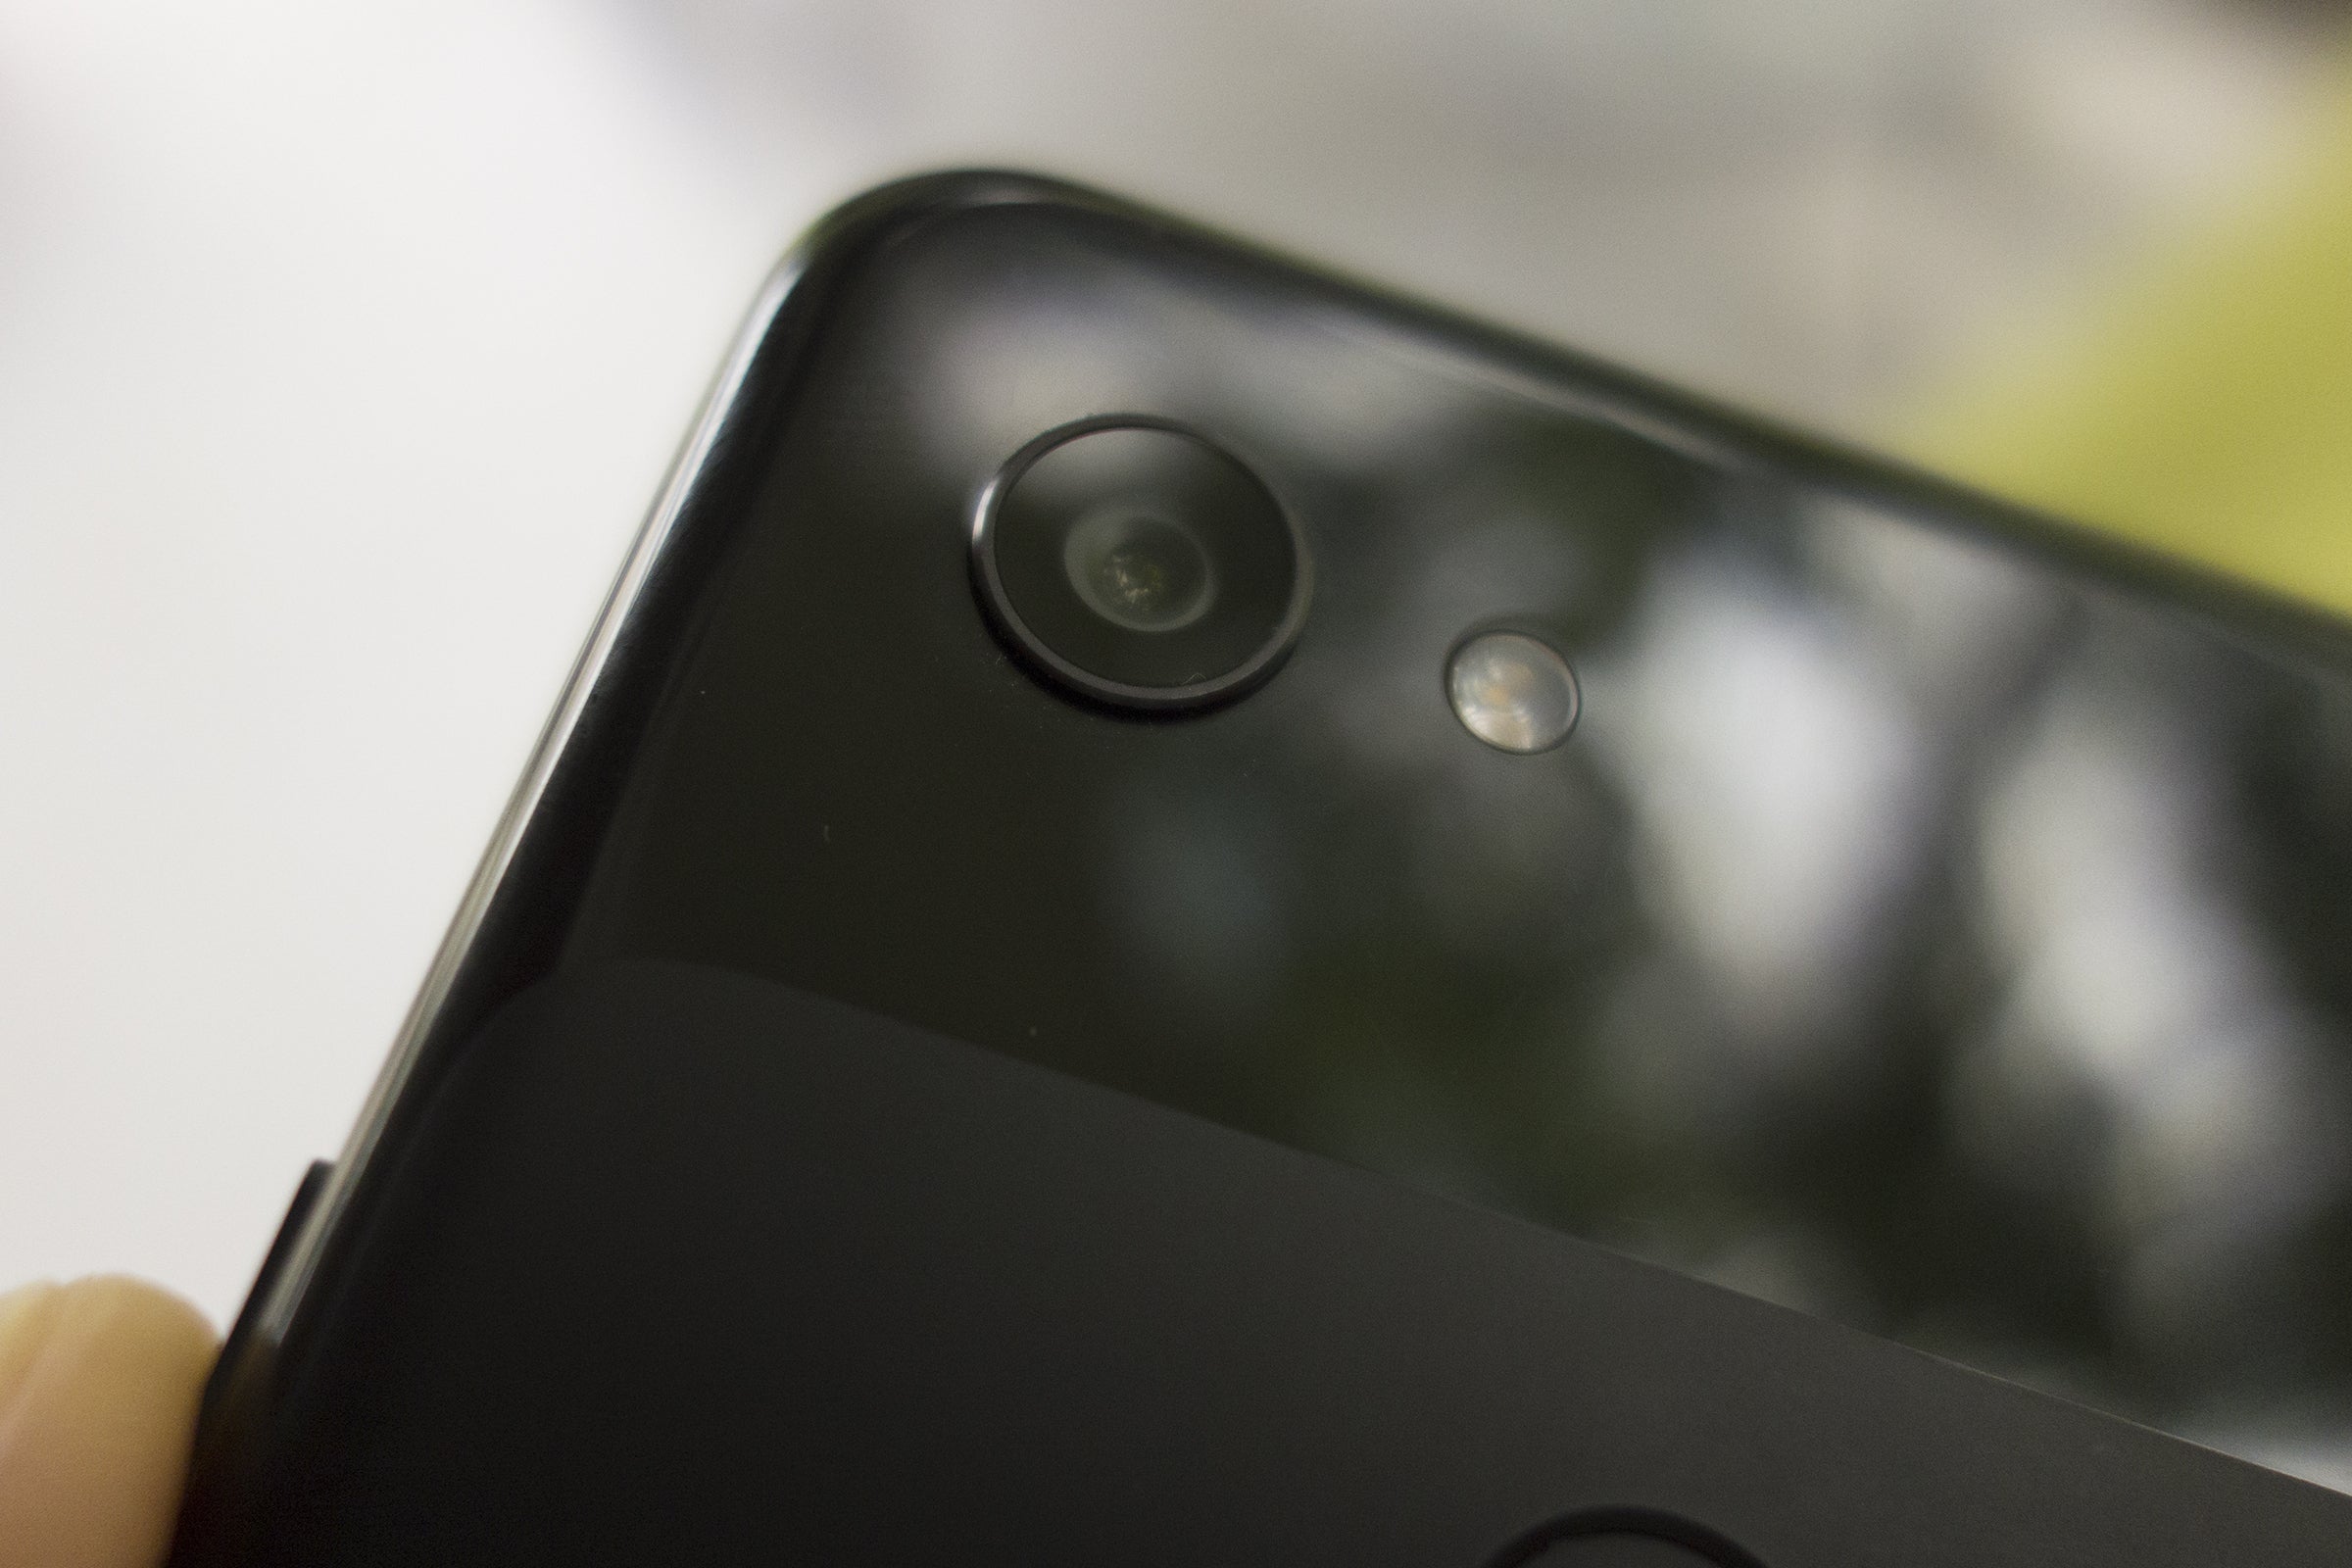 Google Pixel 3a review: A budget phone that acts like a premium ...